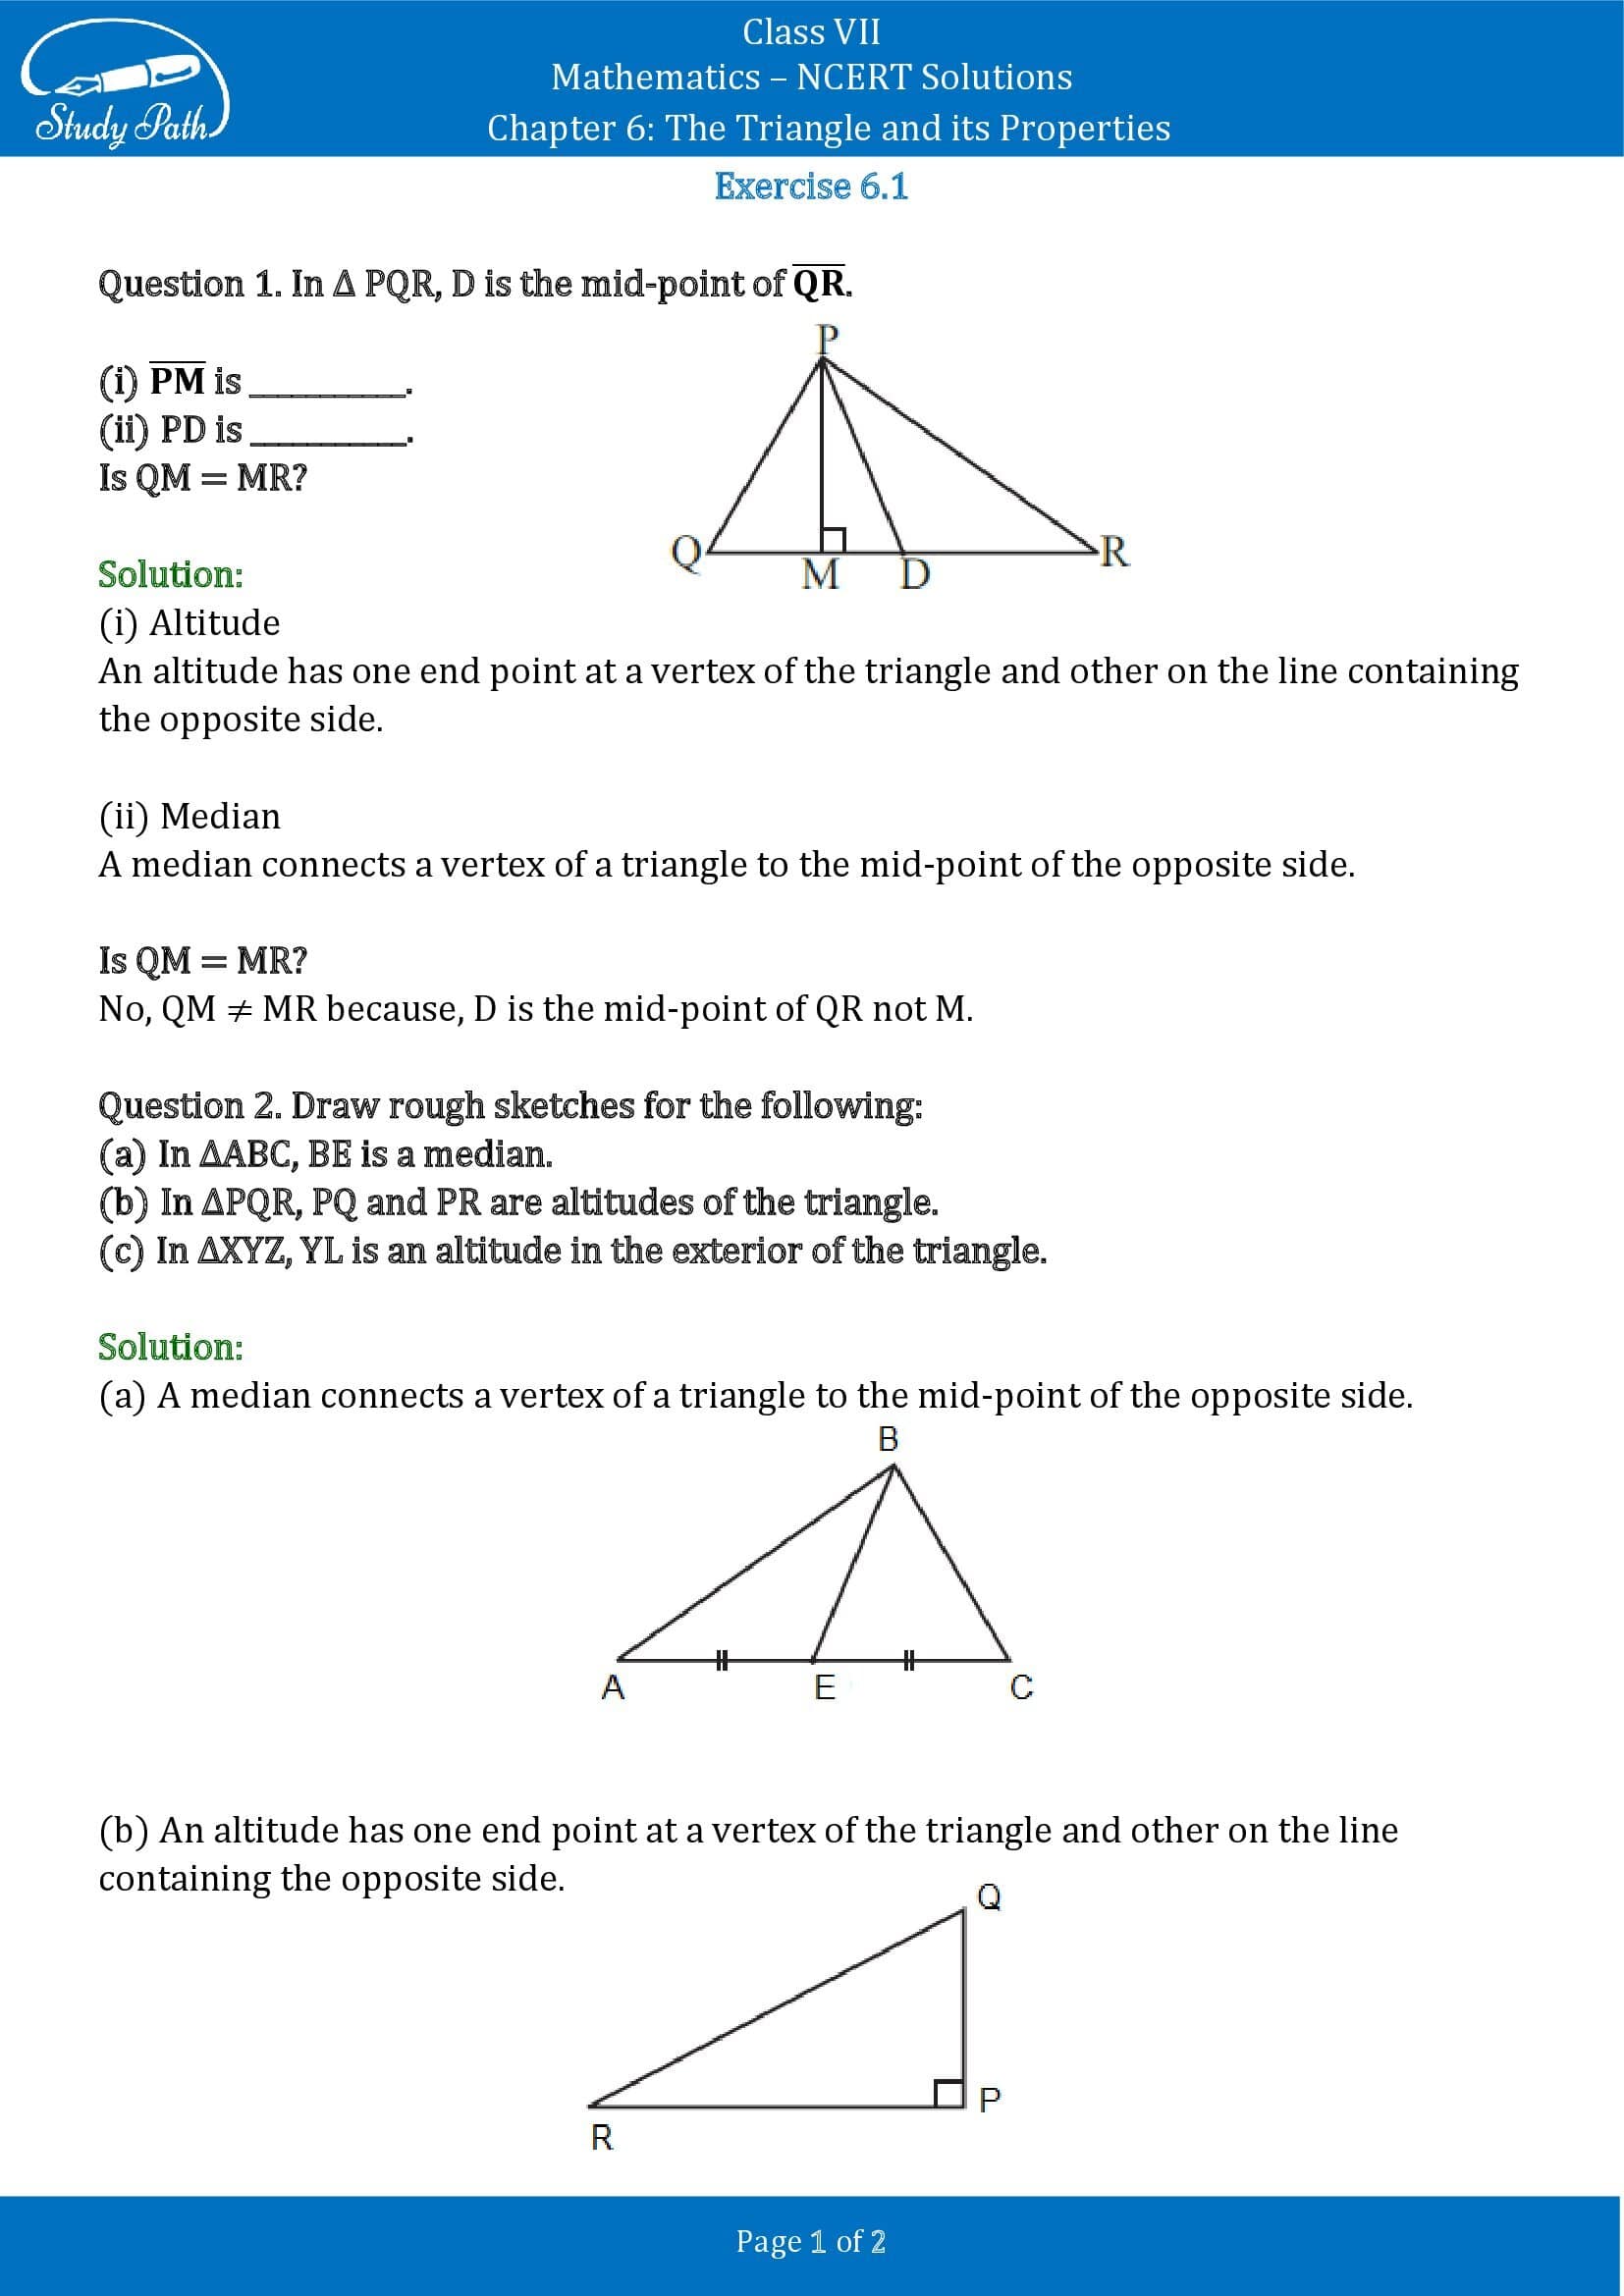 NCERT Solutions for Class 7 Maths Chapter 6 The Triangle and its Properties Exercise 6.1 00001